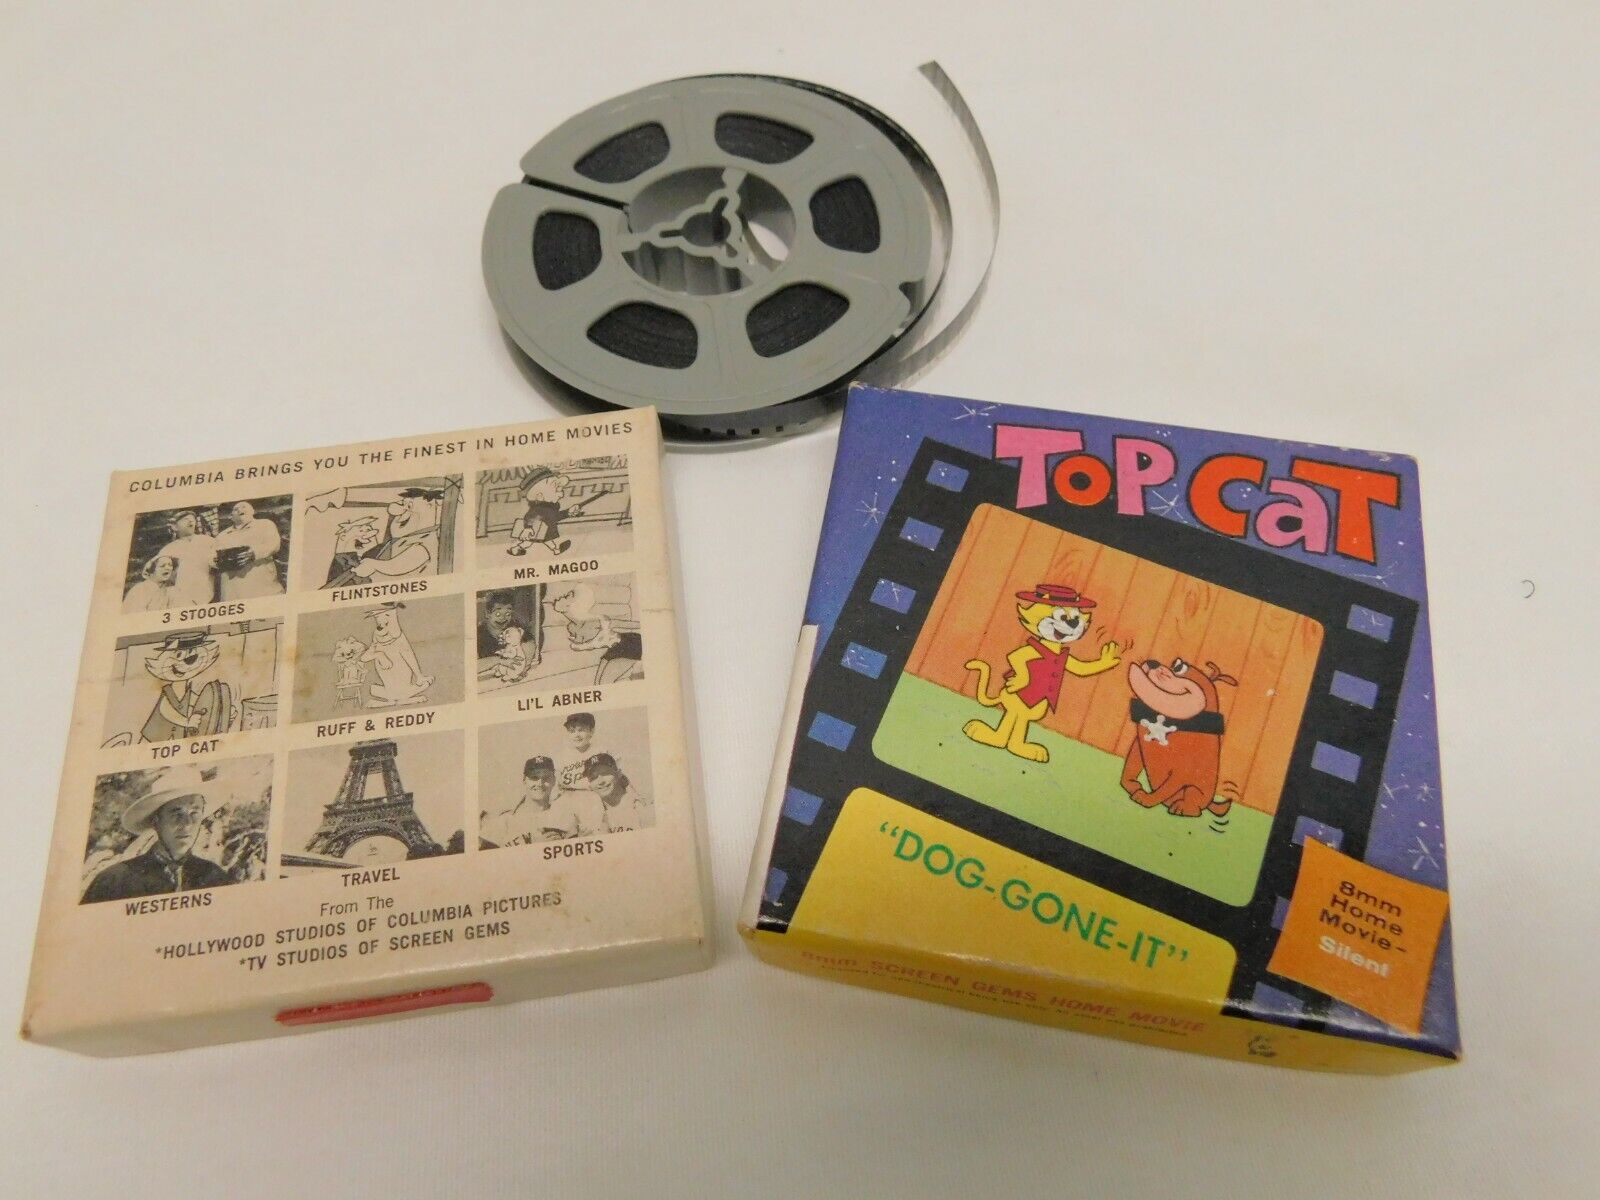 ANTIQUE 1960\'s TOP CAT Dog-Gone-It 8mm HOME MOVIE ~ SILENT 8mm HANNA-BARBERA